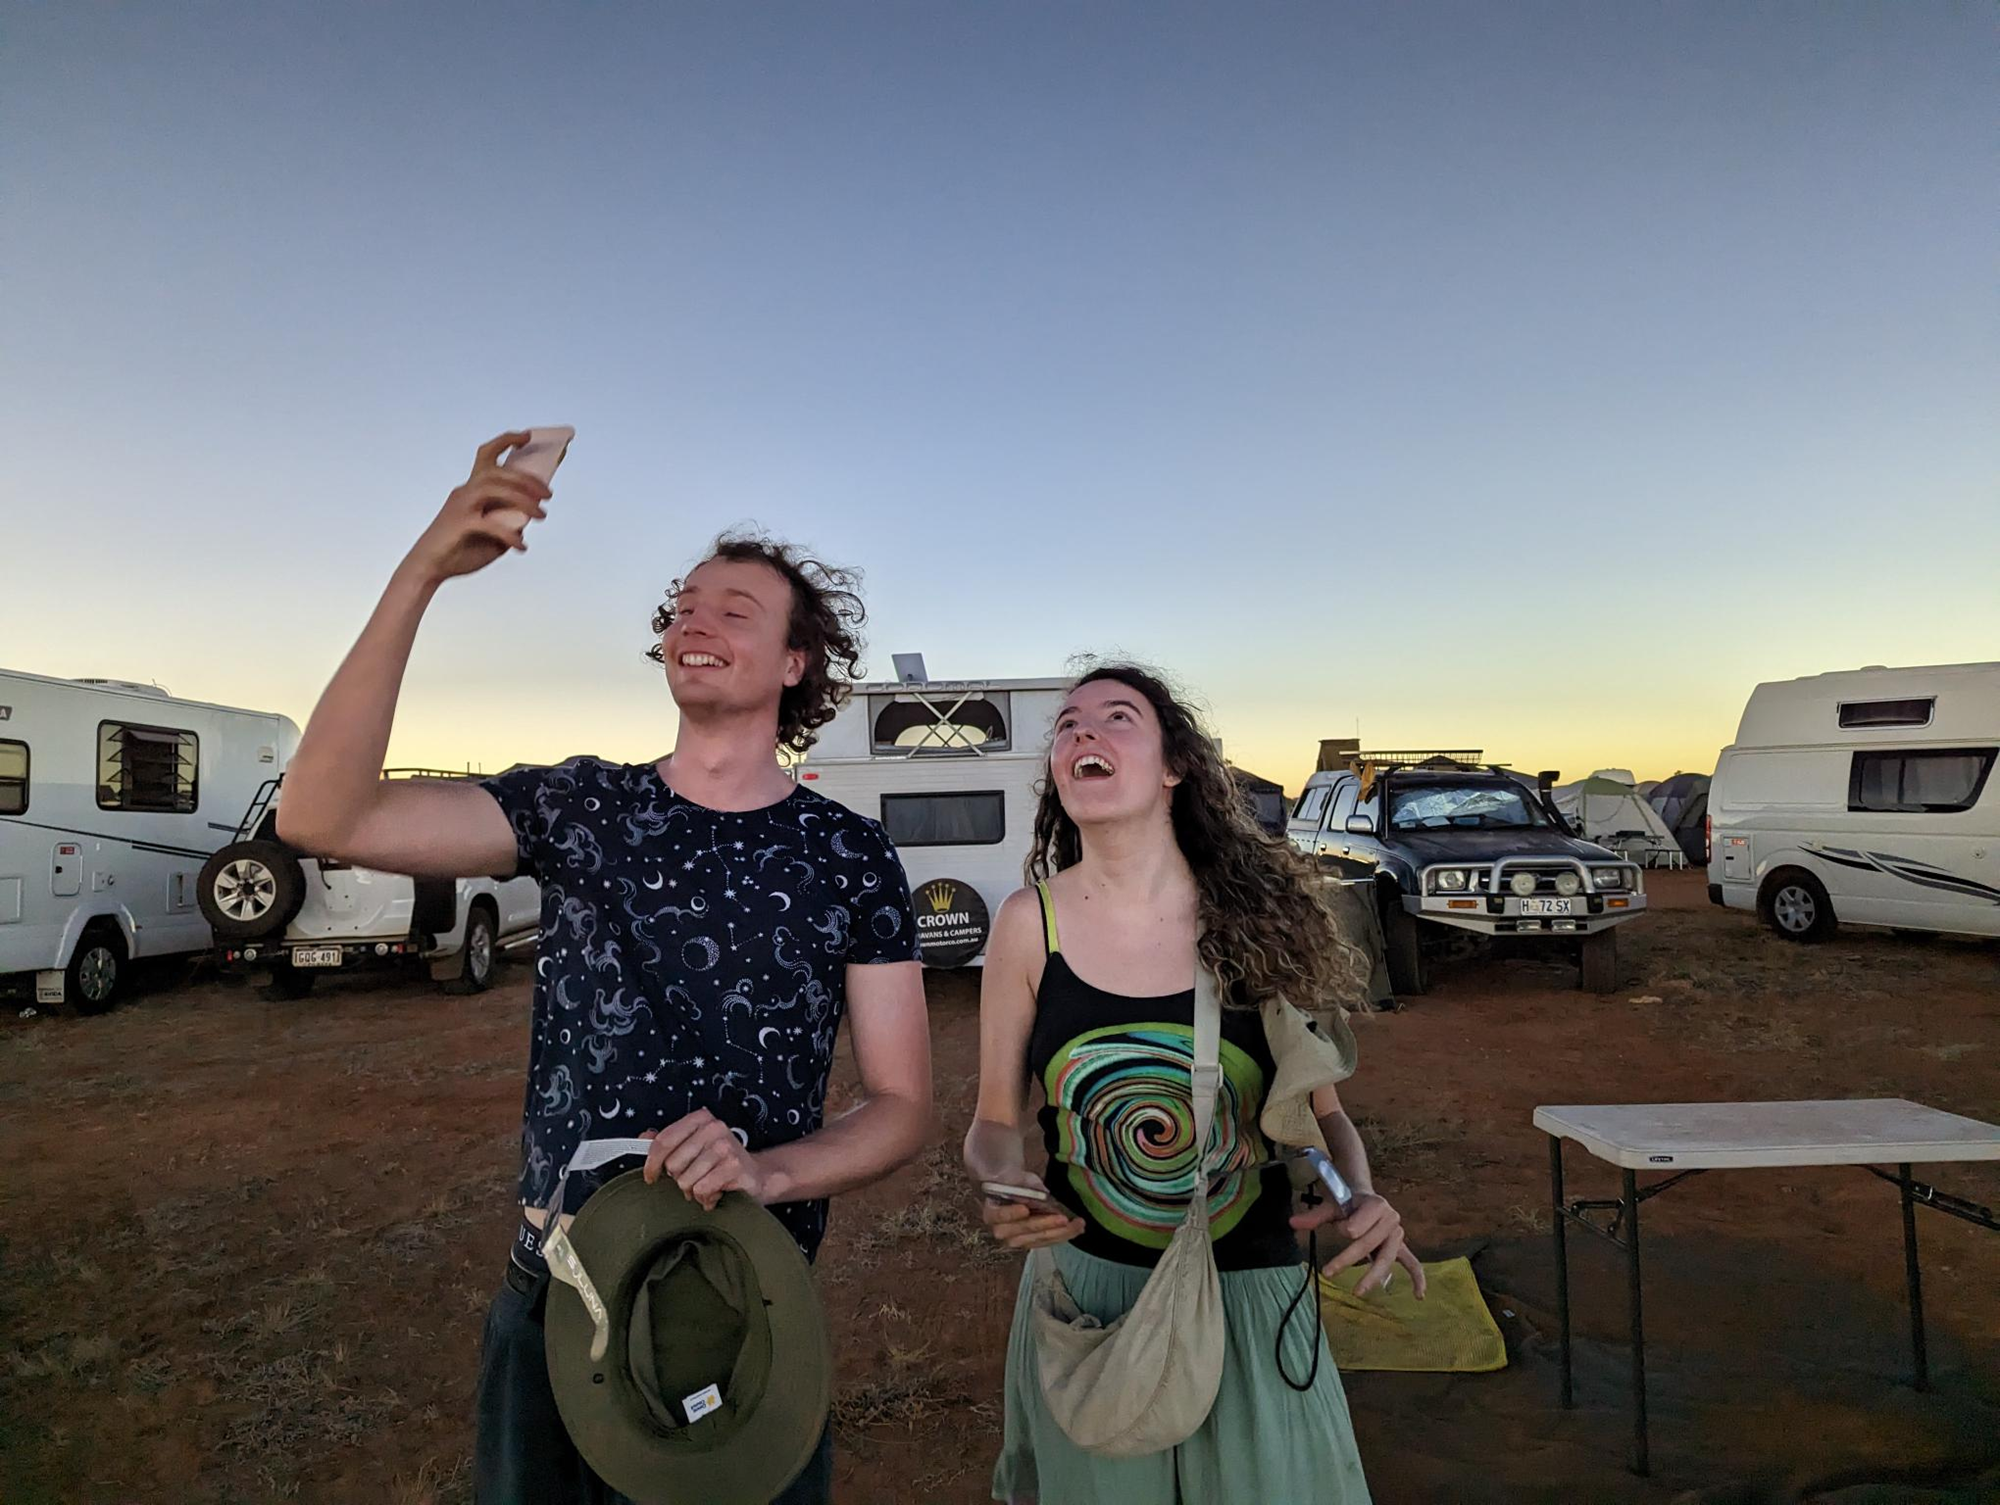 Two young people smile and take photos on their phone.